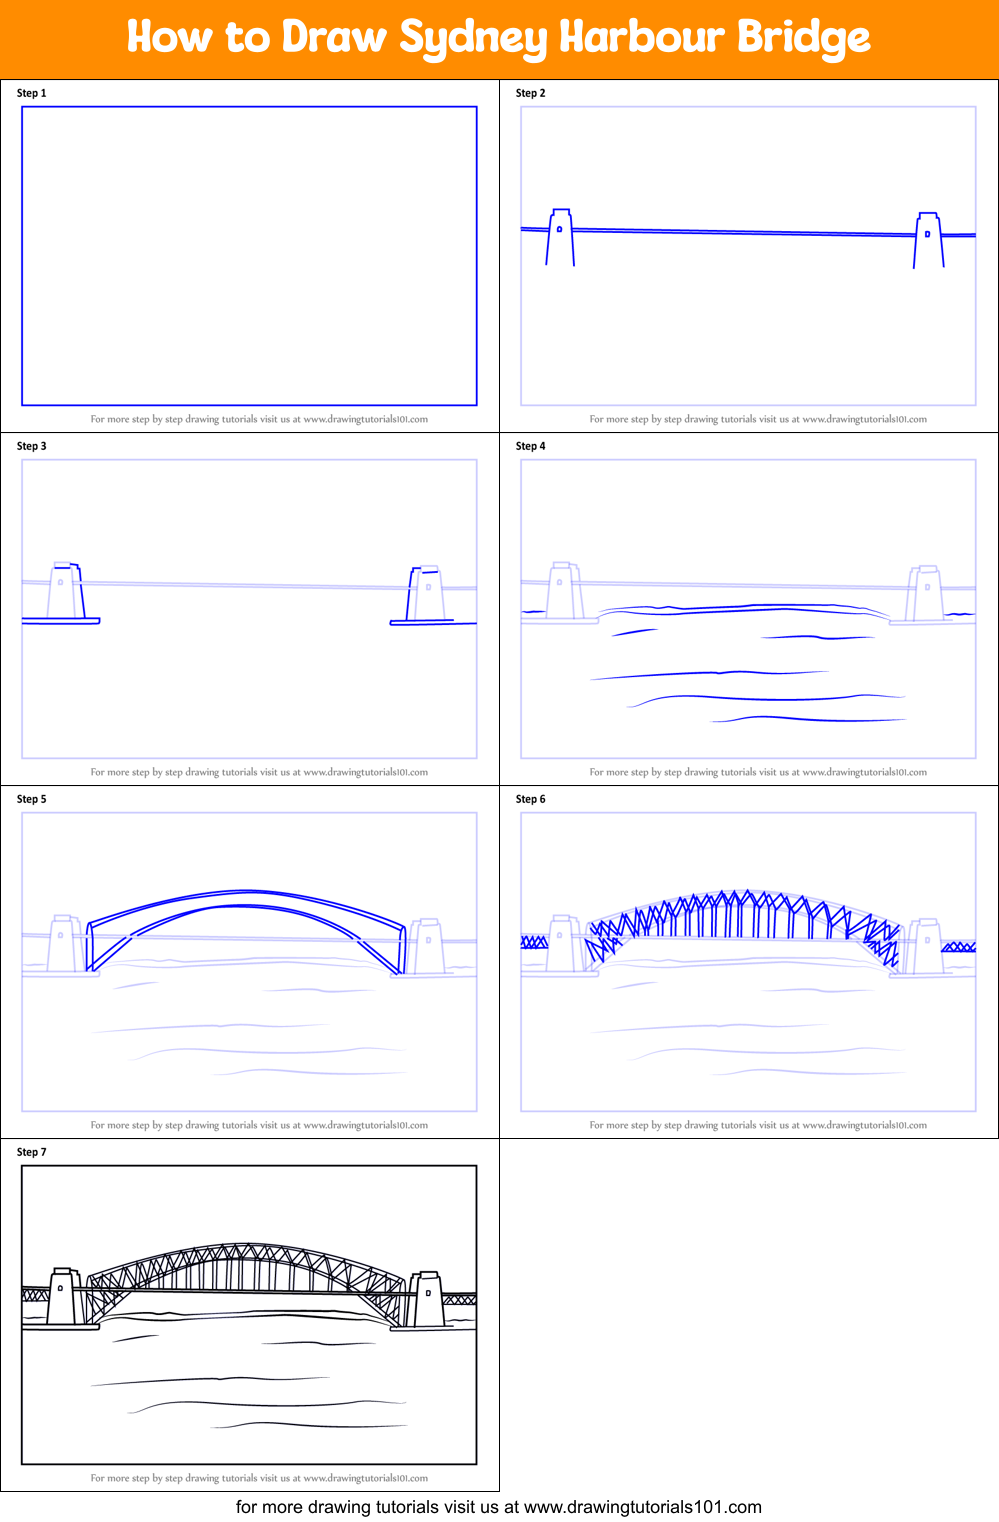 How to Draw Sydney Harbour Bridge printable step by step drawing sheet